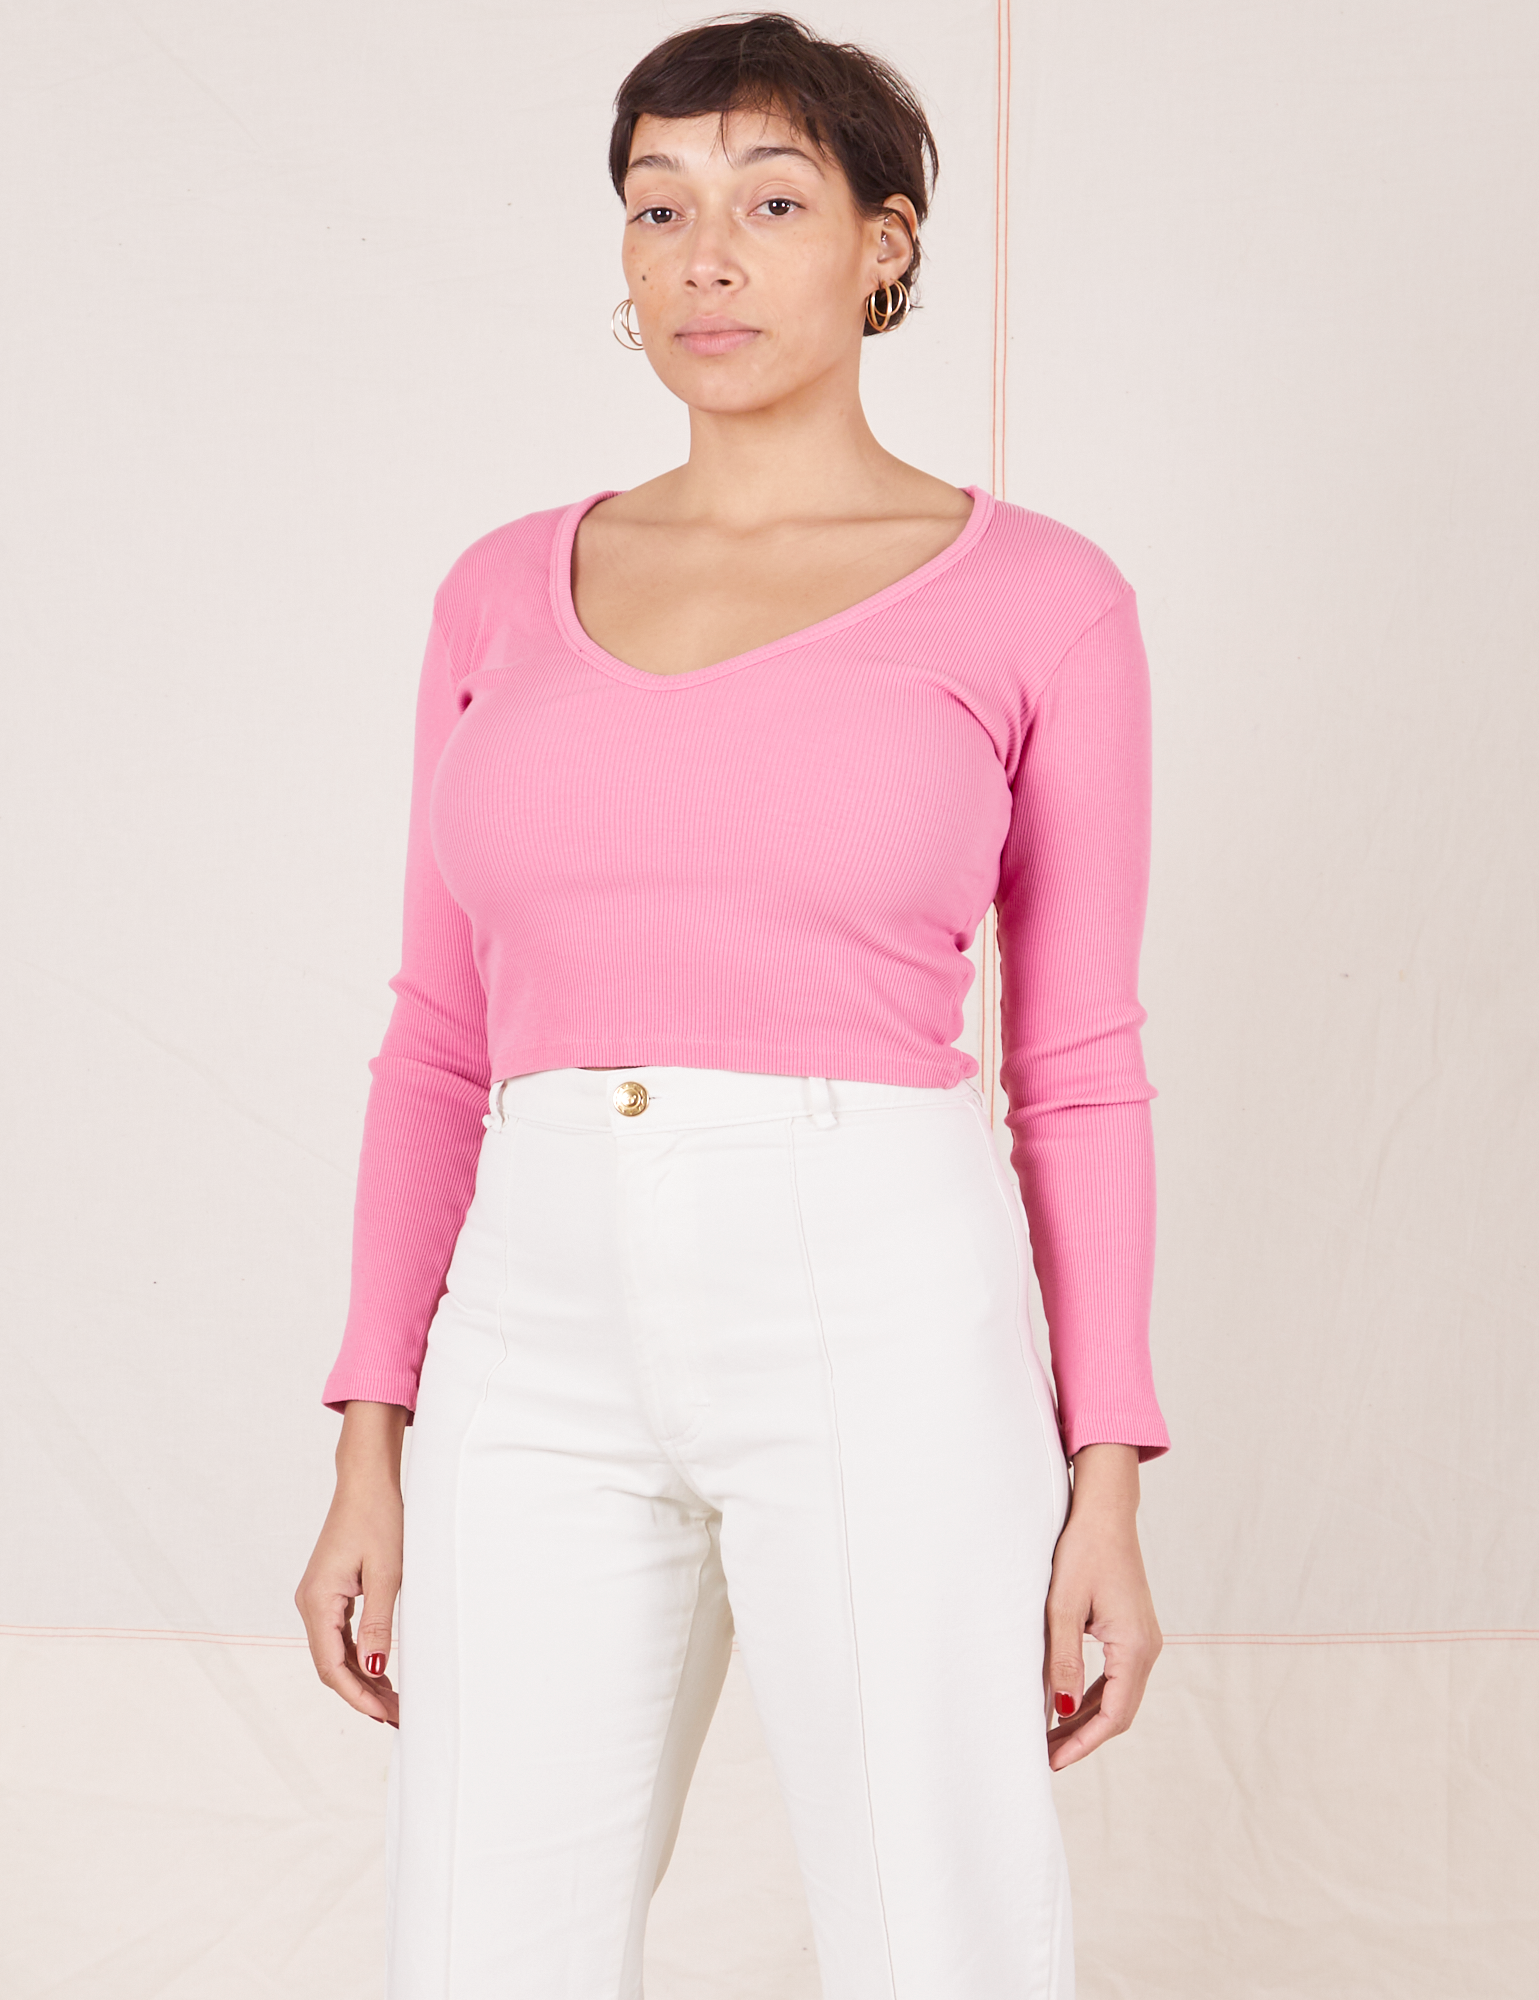 Tiara is wearing size S Long Sleeve V-Neck Tee in Bubblegum Pink paired with vintage tee off-white Western Pants